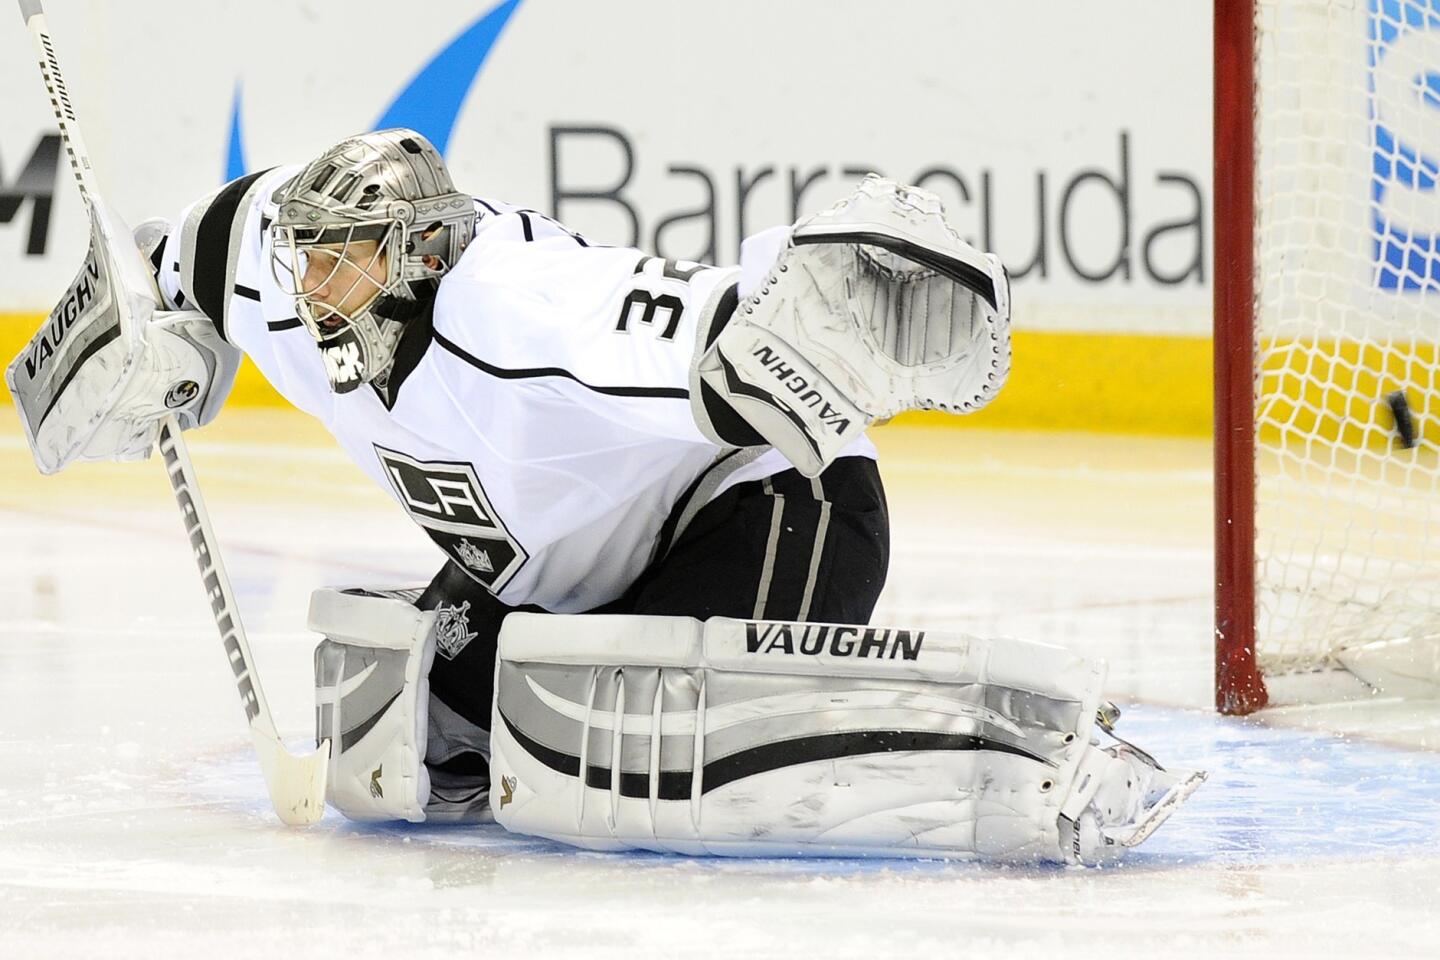 Sharks lose to Kings 3-2 in finale